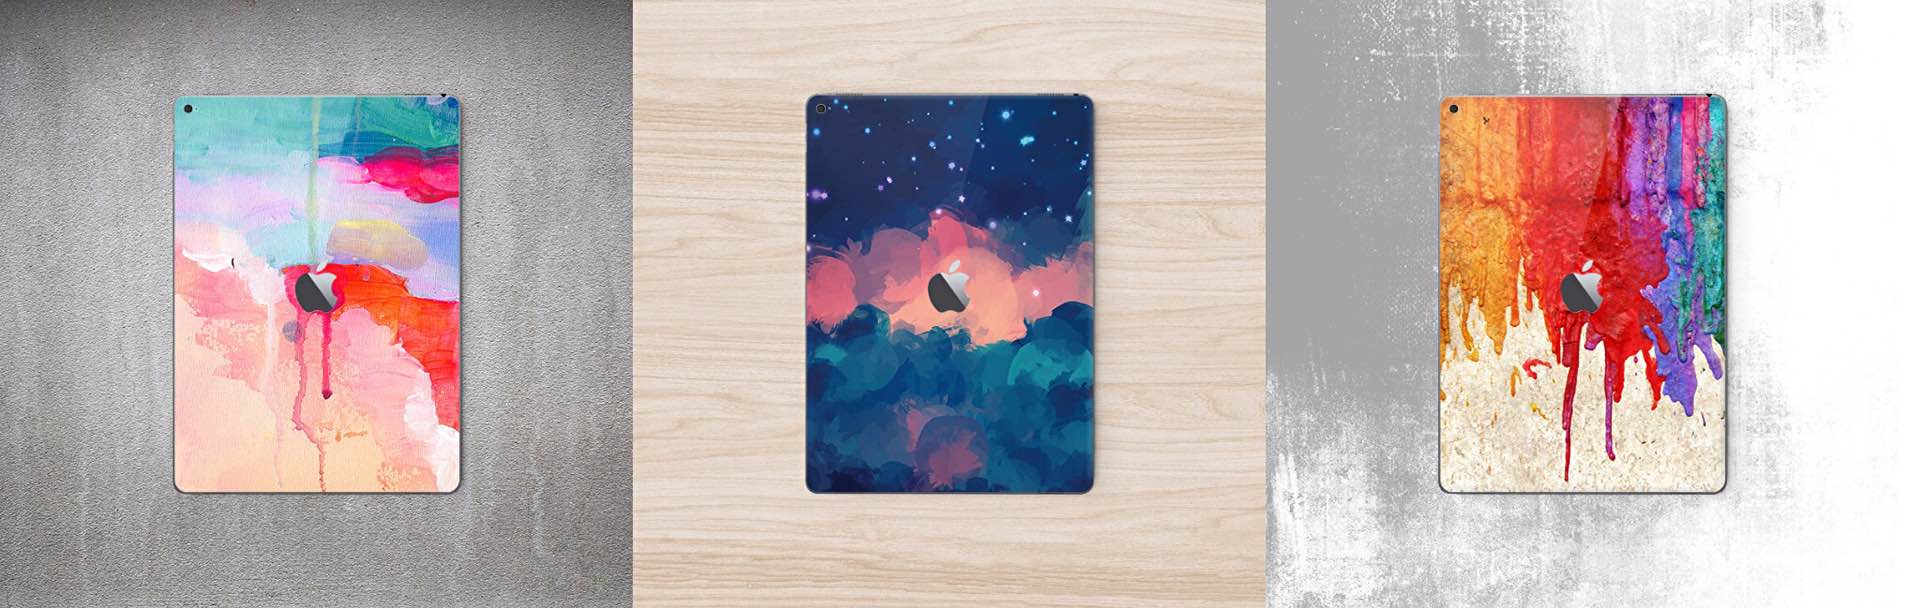 mixeddecal-decal-sticker-covers-ipad-pro